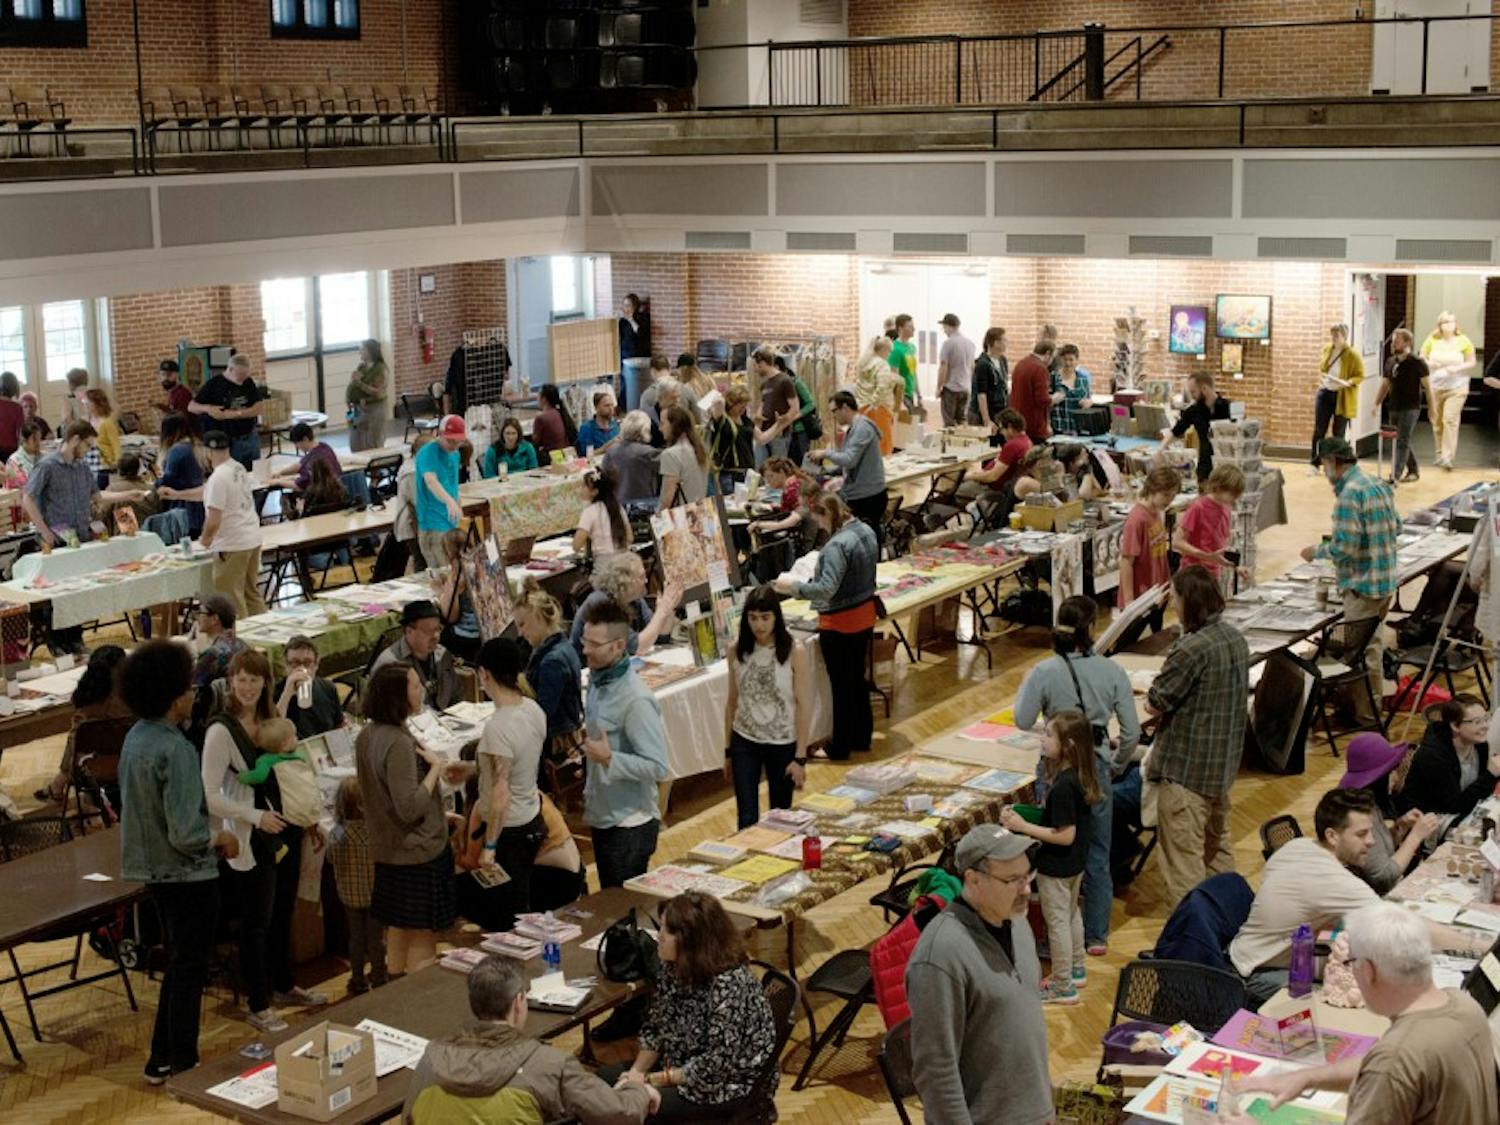 The Zine Machine Printed Matter Festival is Saturday from 11 a.m. to 6 p.m. in Durham. Photo courtesy of Bill Fick.